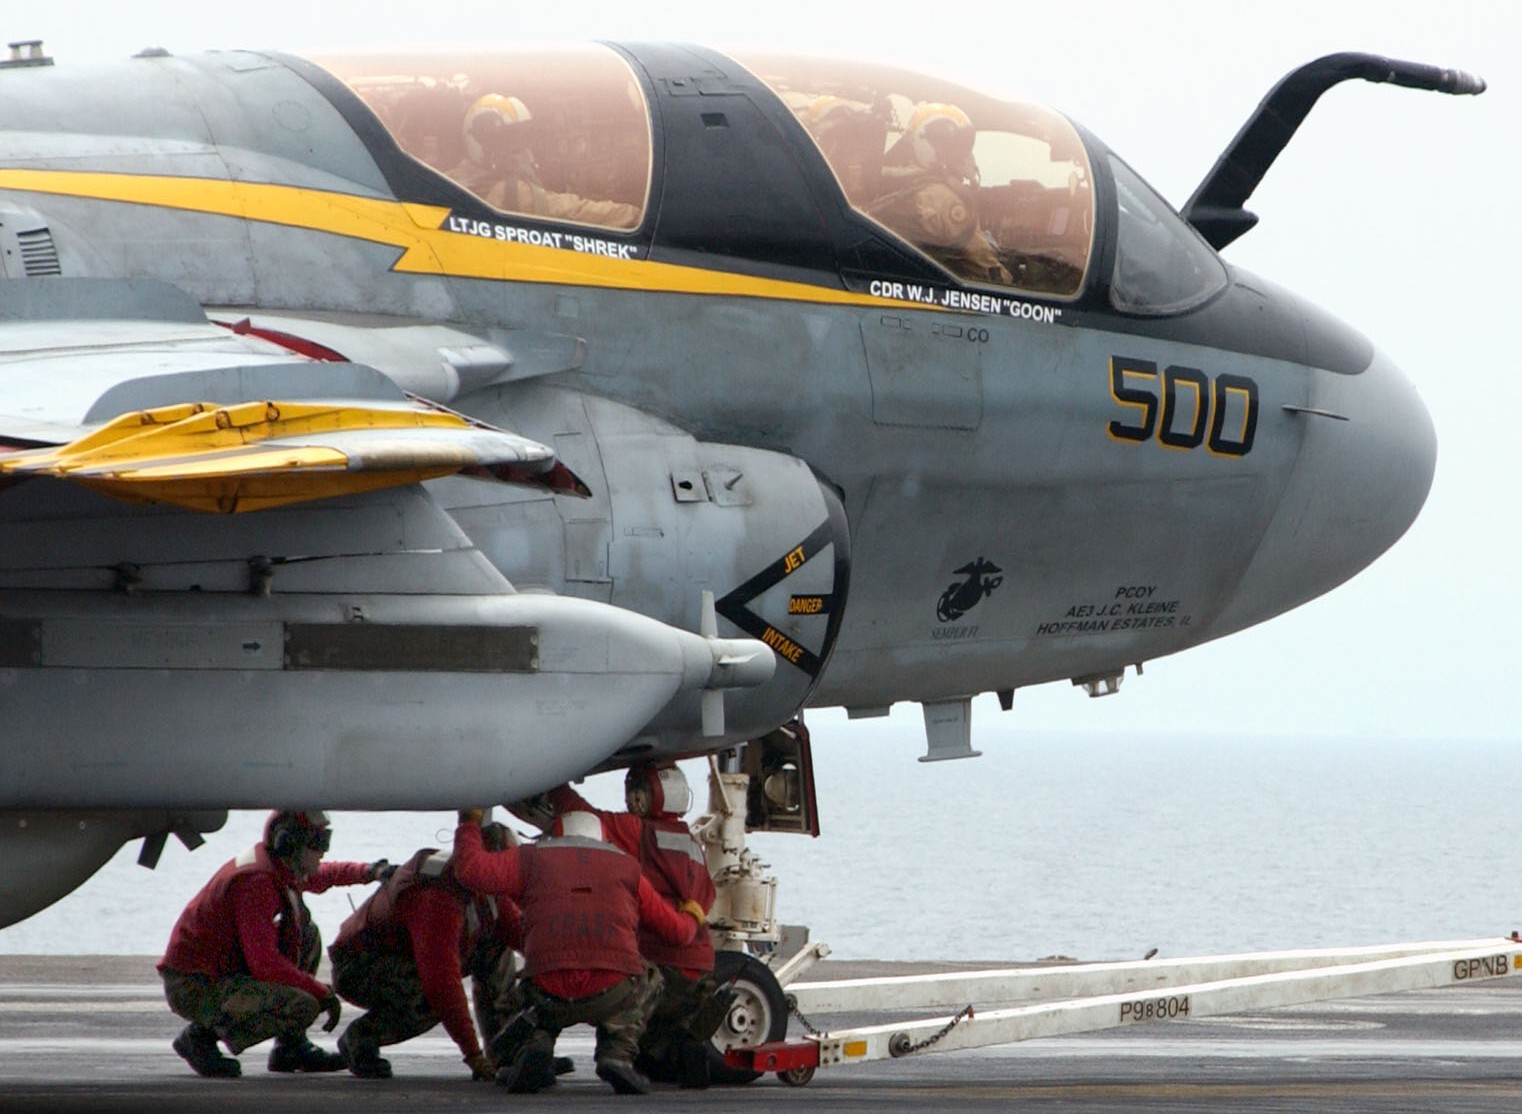 vaq-138 yellowjackets electronic attack squadron us navy ea-6b prowler carrier air wing cvw-9 uss carl vinson cvn-70 13